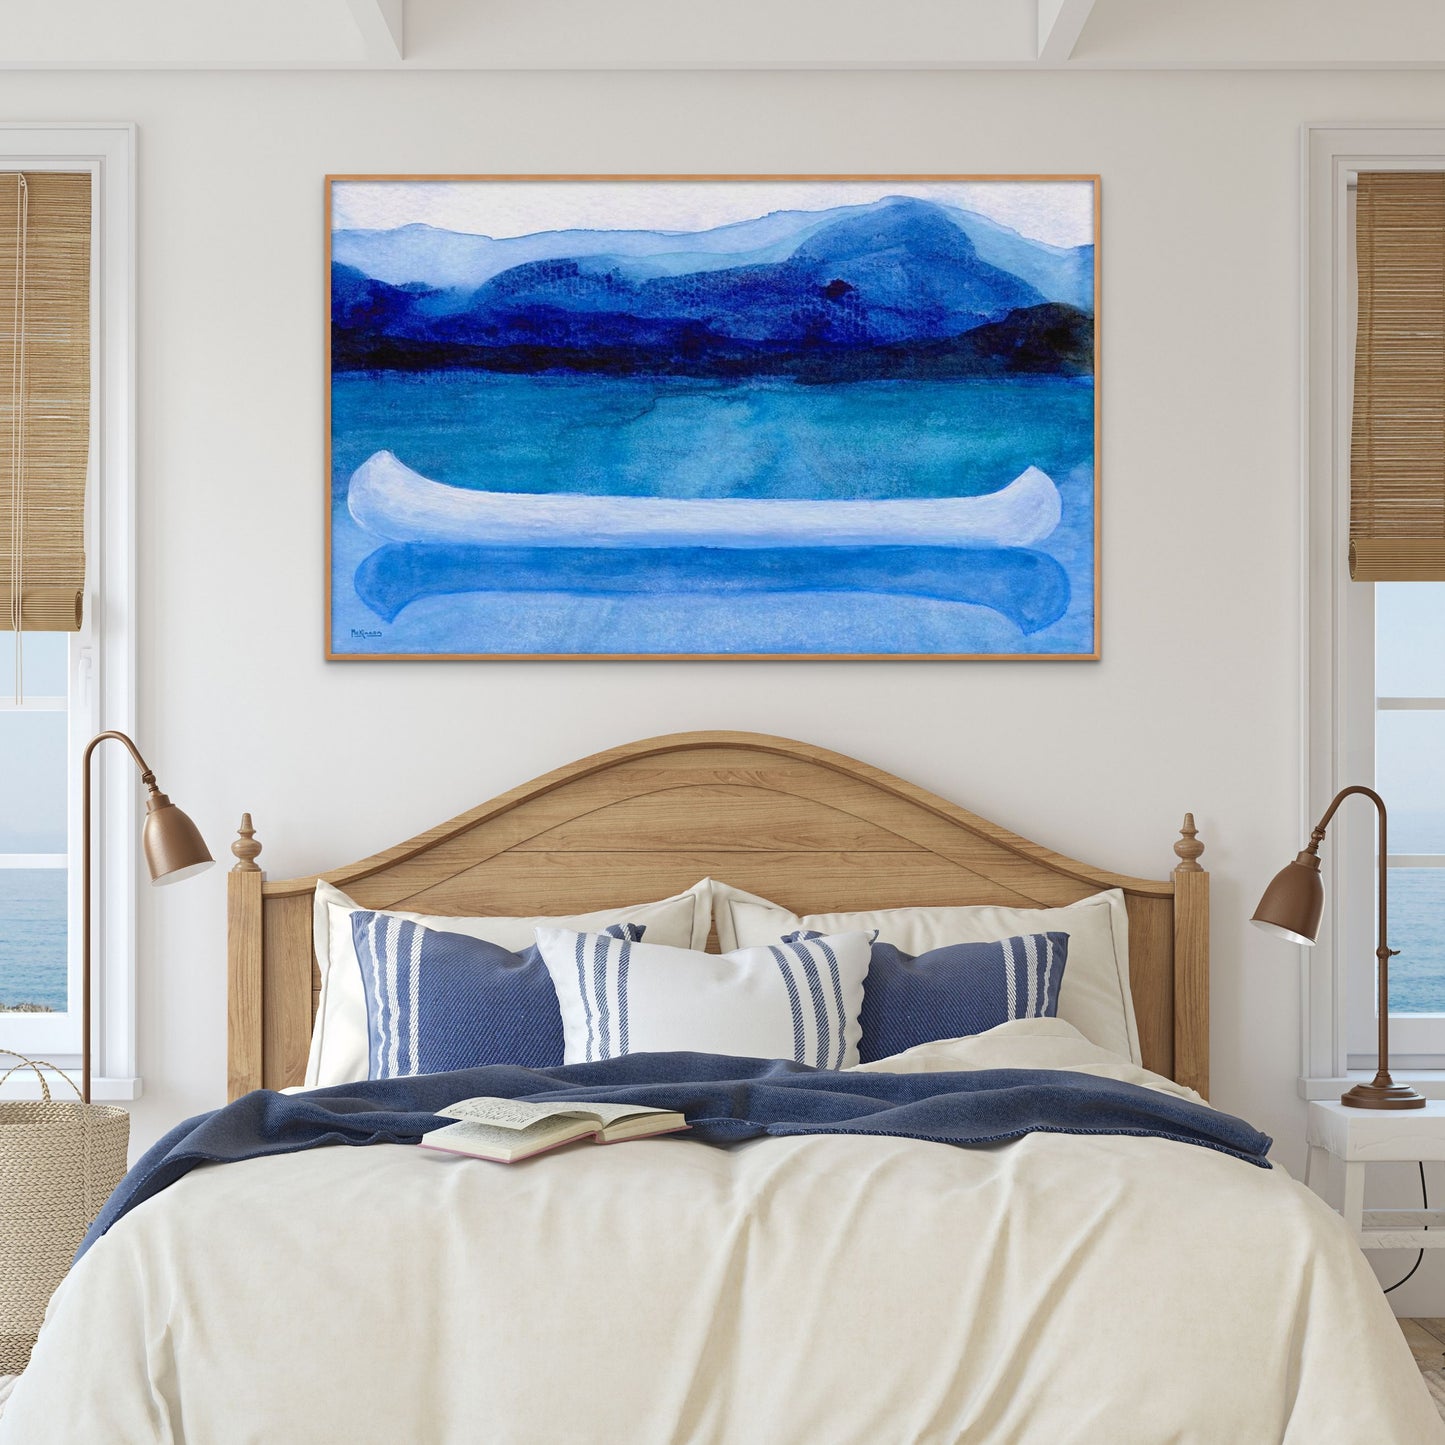 A work of canoeing art by Canadian artist Catherine McKinnon. The watercolor depicts a small white boat, a "canoe", on blue water with a dark blue distant shore and lighter blue distant moutains. The giclee print is framed in natural wood and is mounted on a white wall above a bed in a blue and white coastal themed bedroom.